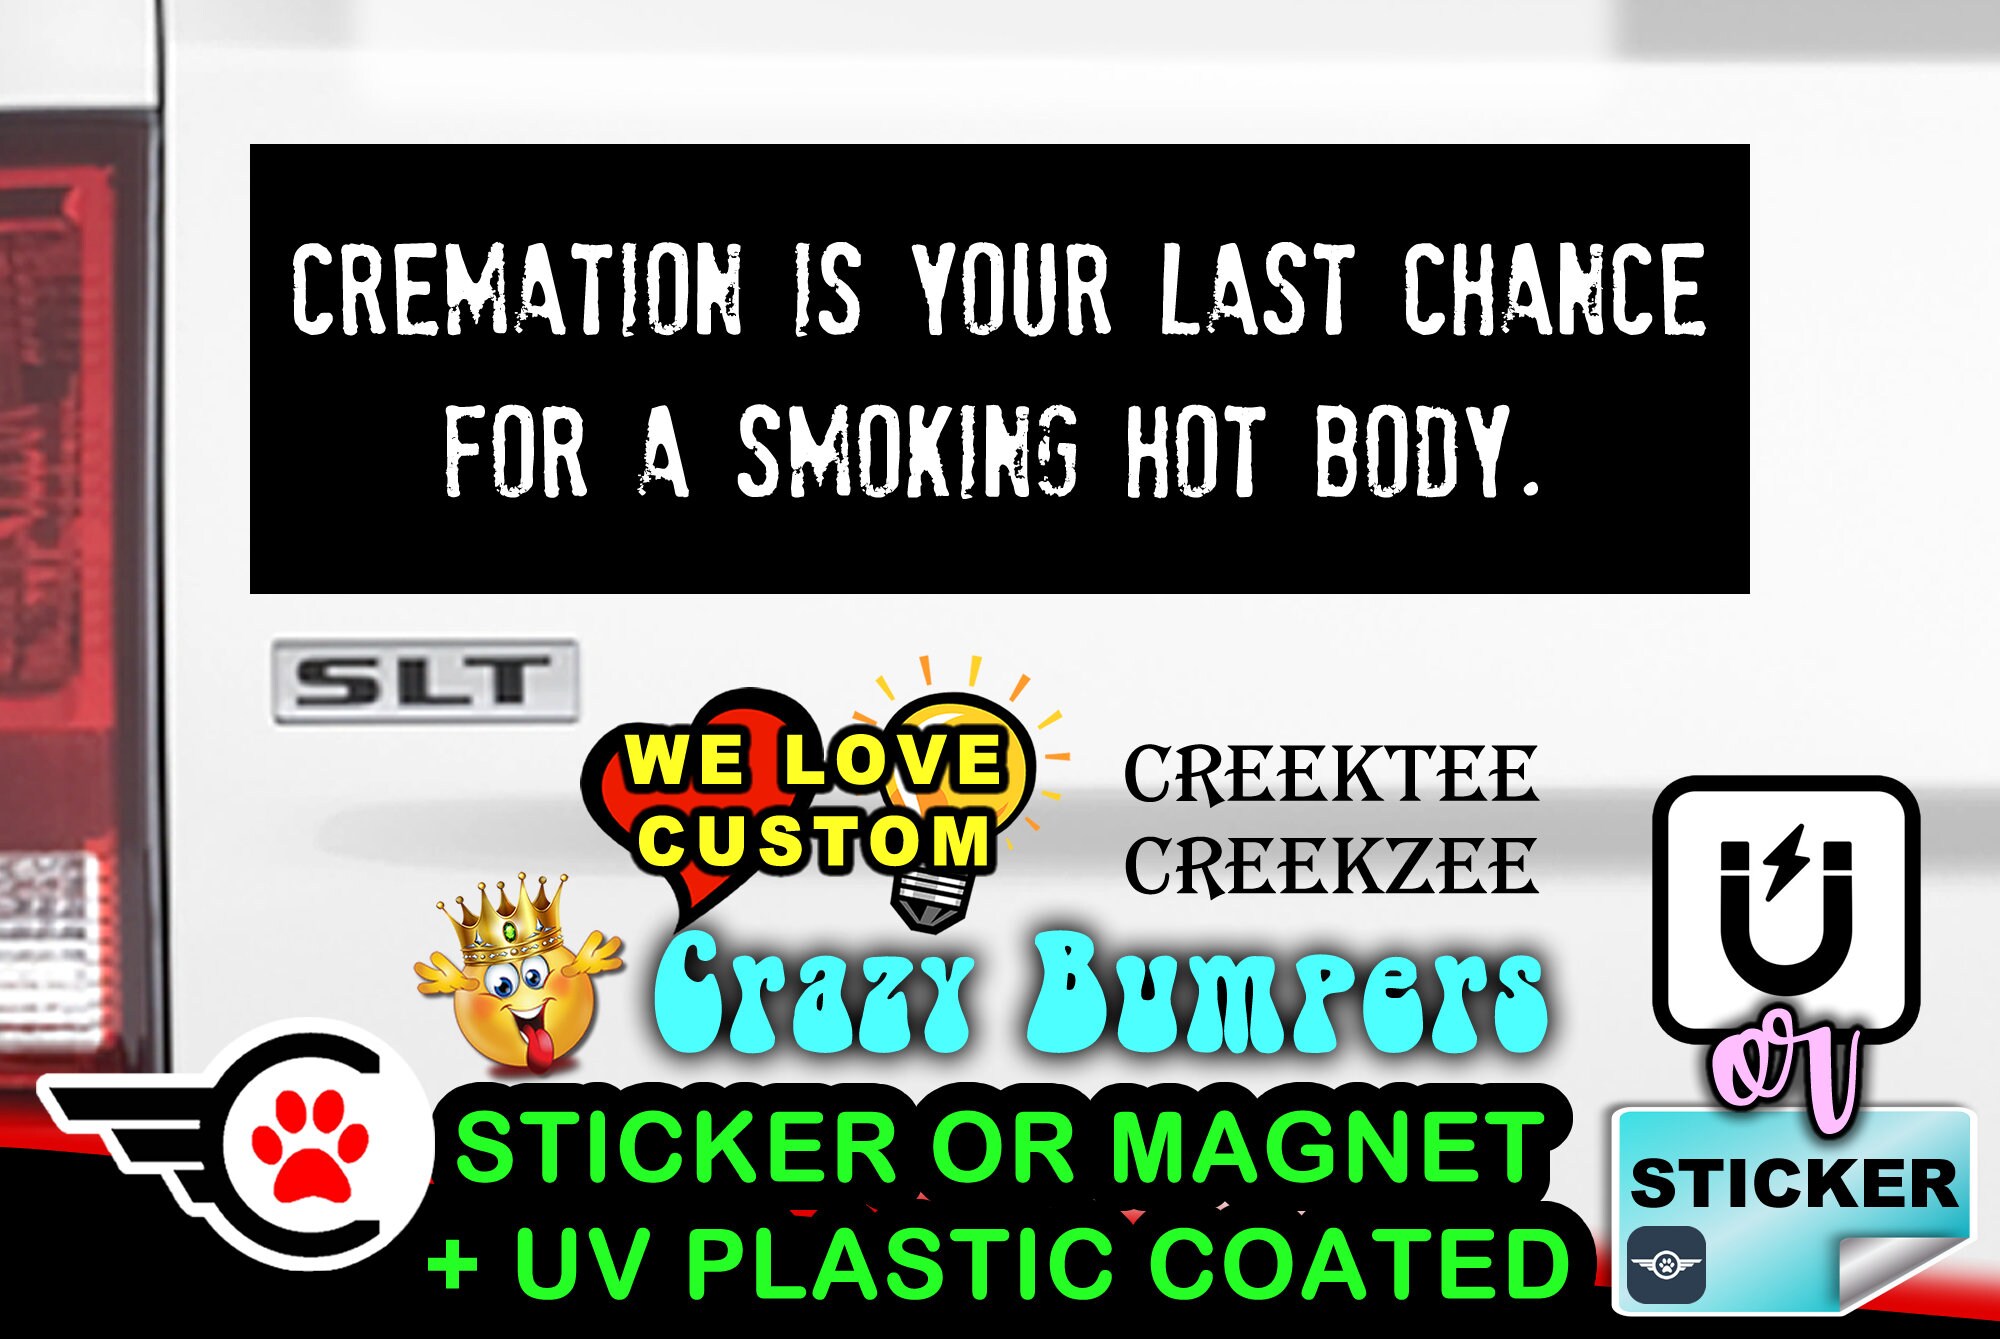 Cremation is your last chance for a smoking hot body Bumper Sticker or Magnet sizes 4